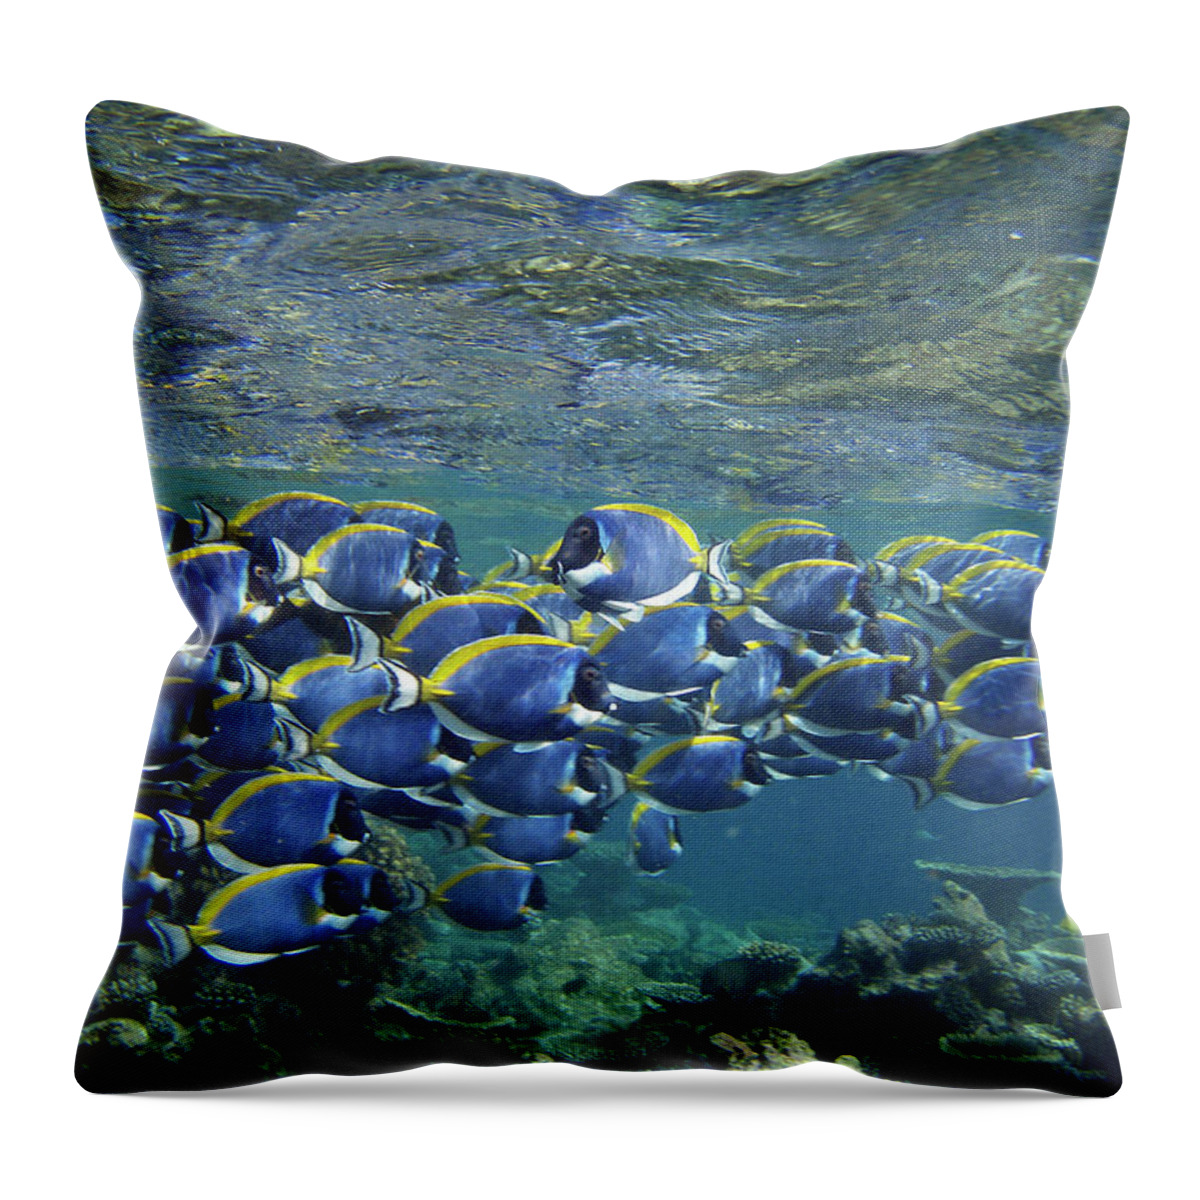 Underwater Throw Pillow featuring the photograph Biyadoo, South Male Atoll, Maldives by Federica Grassi